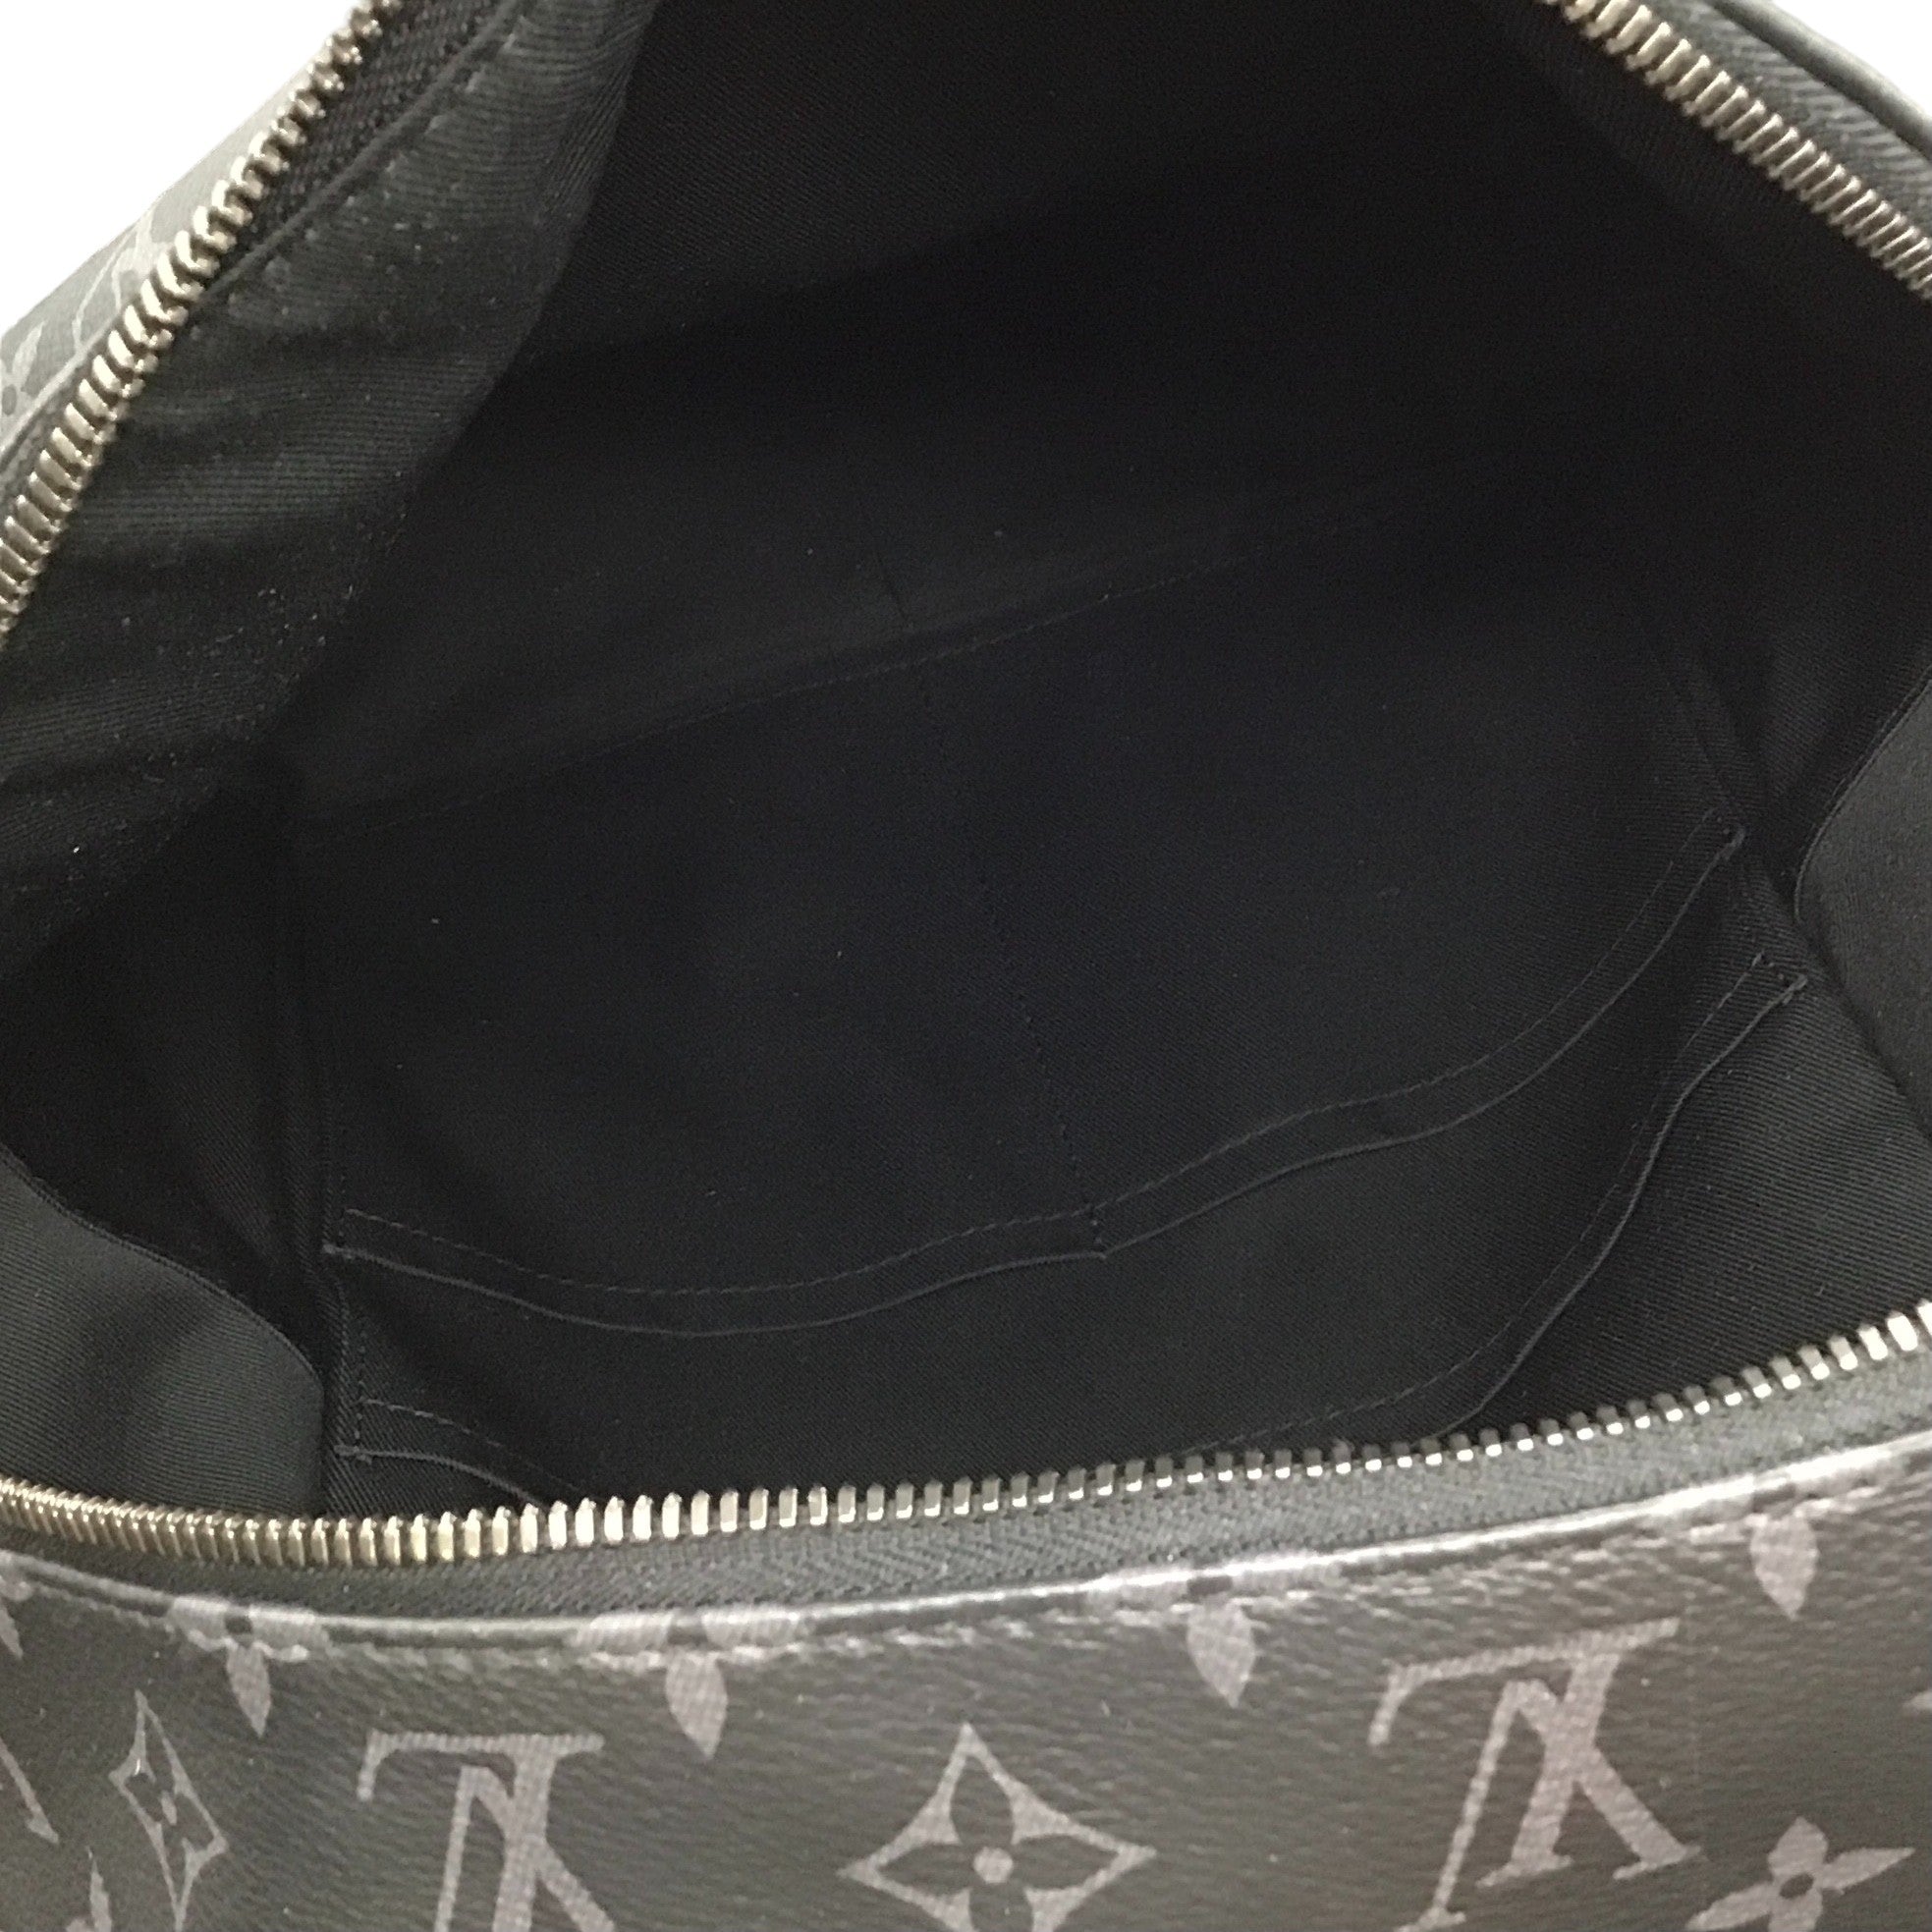 Louis Vuitton Monogram Eclipse Canvas Discovery Backpack